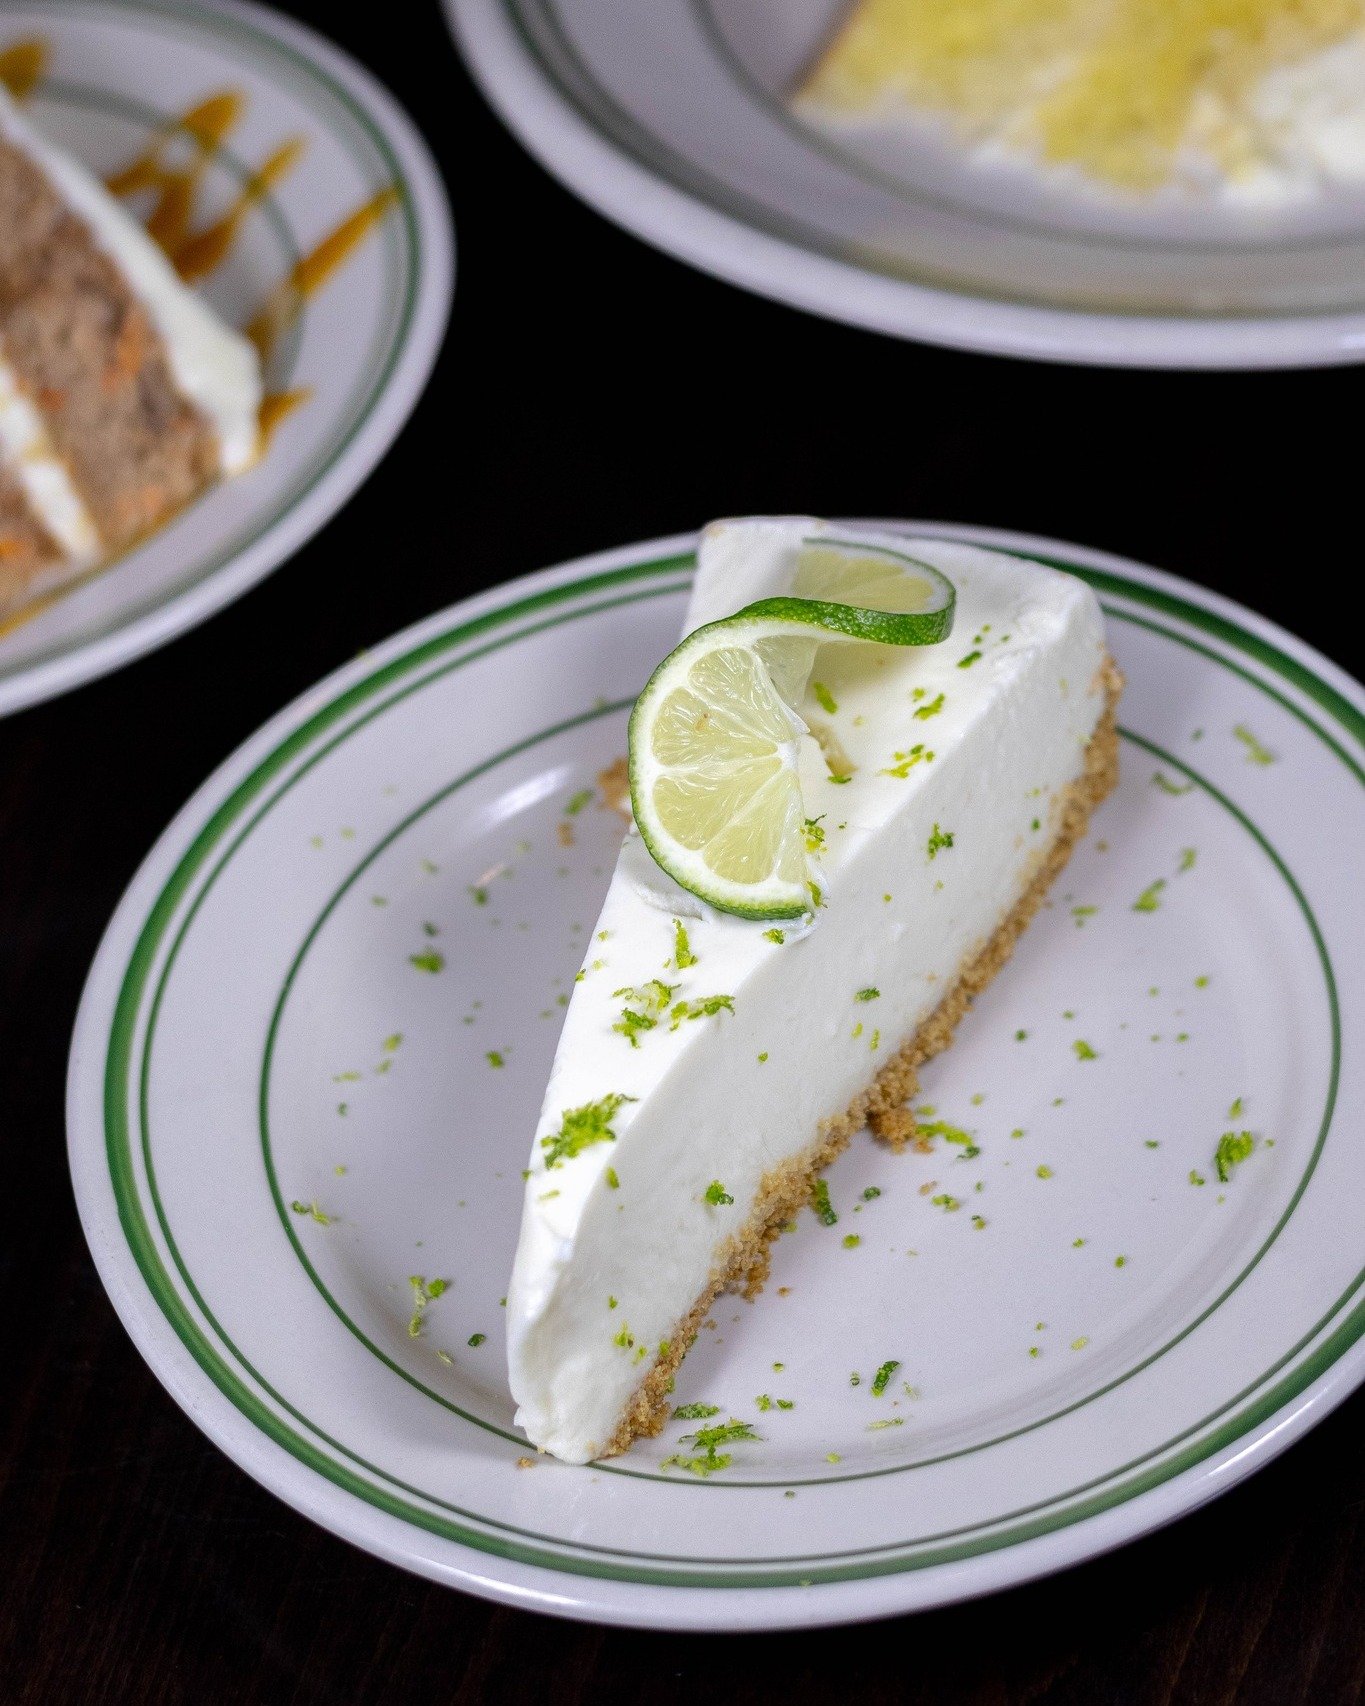 Make sure to save room for dessert 🍰 Try one of our new sweet treats &ndash; we've got Key Lime Cheesecake, Carrot Cake or Tres Leches Cake (&amp; our famous combo skillet too)!